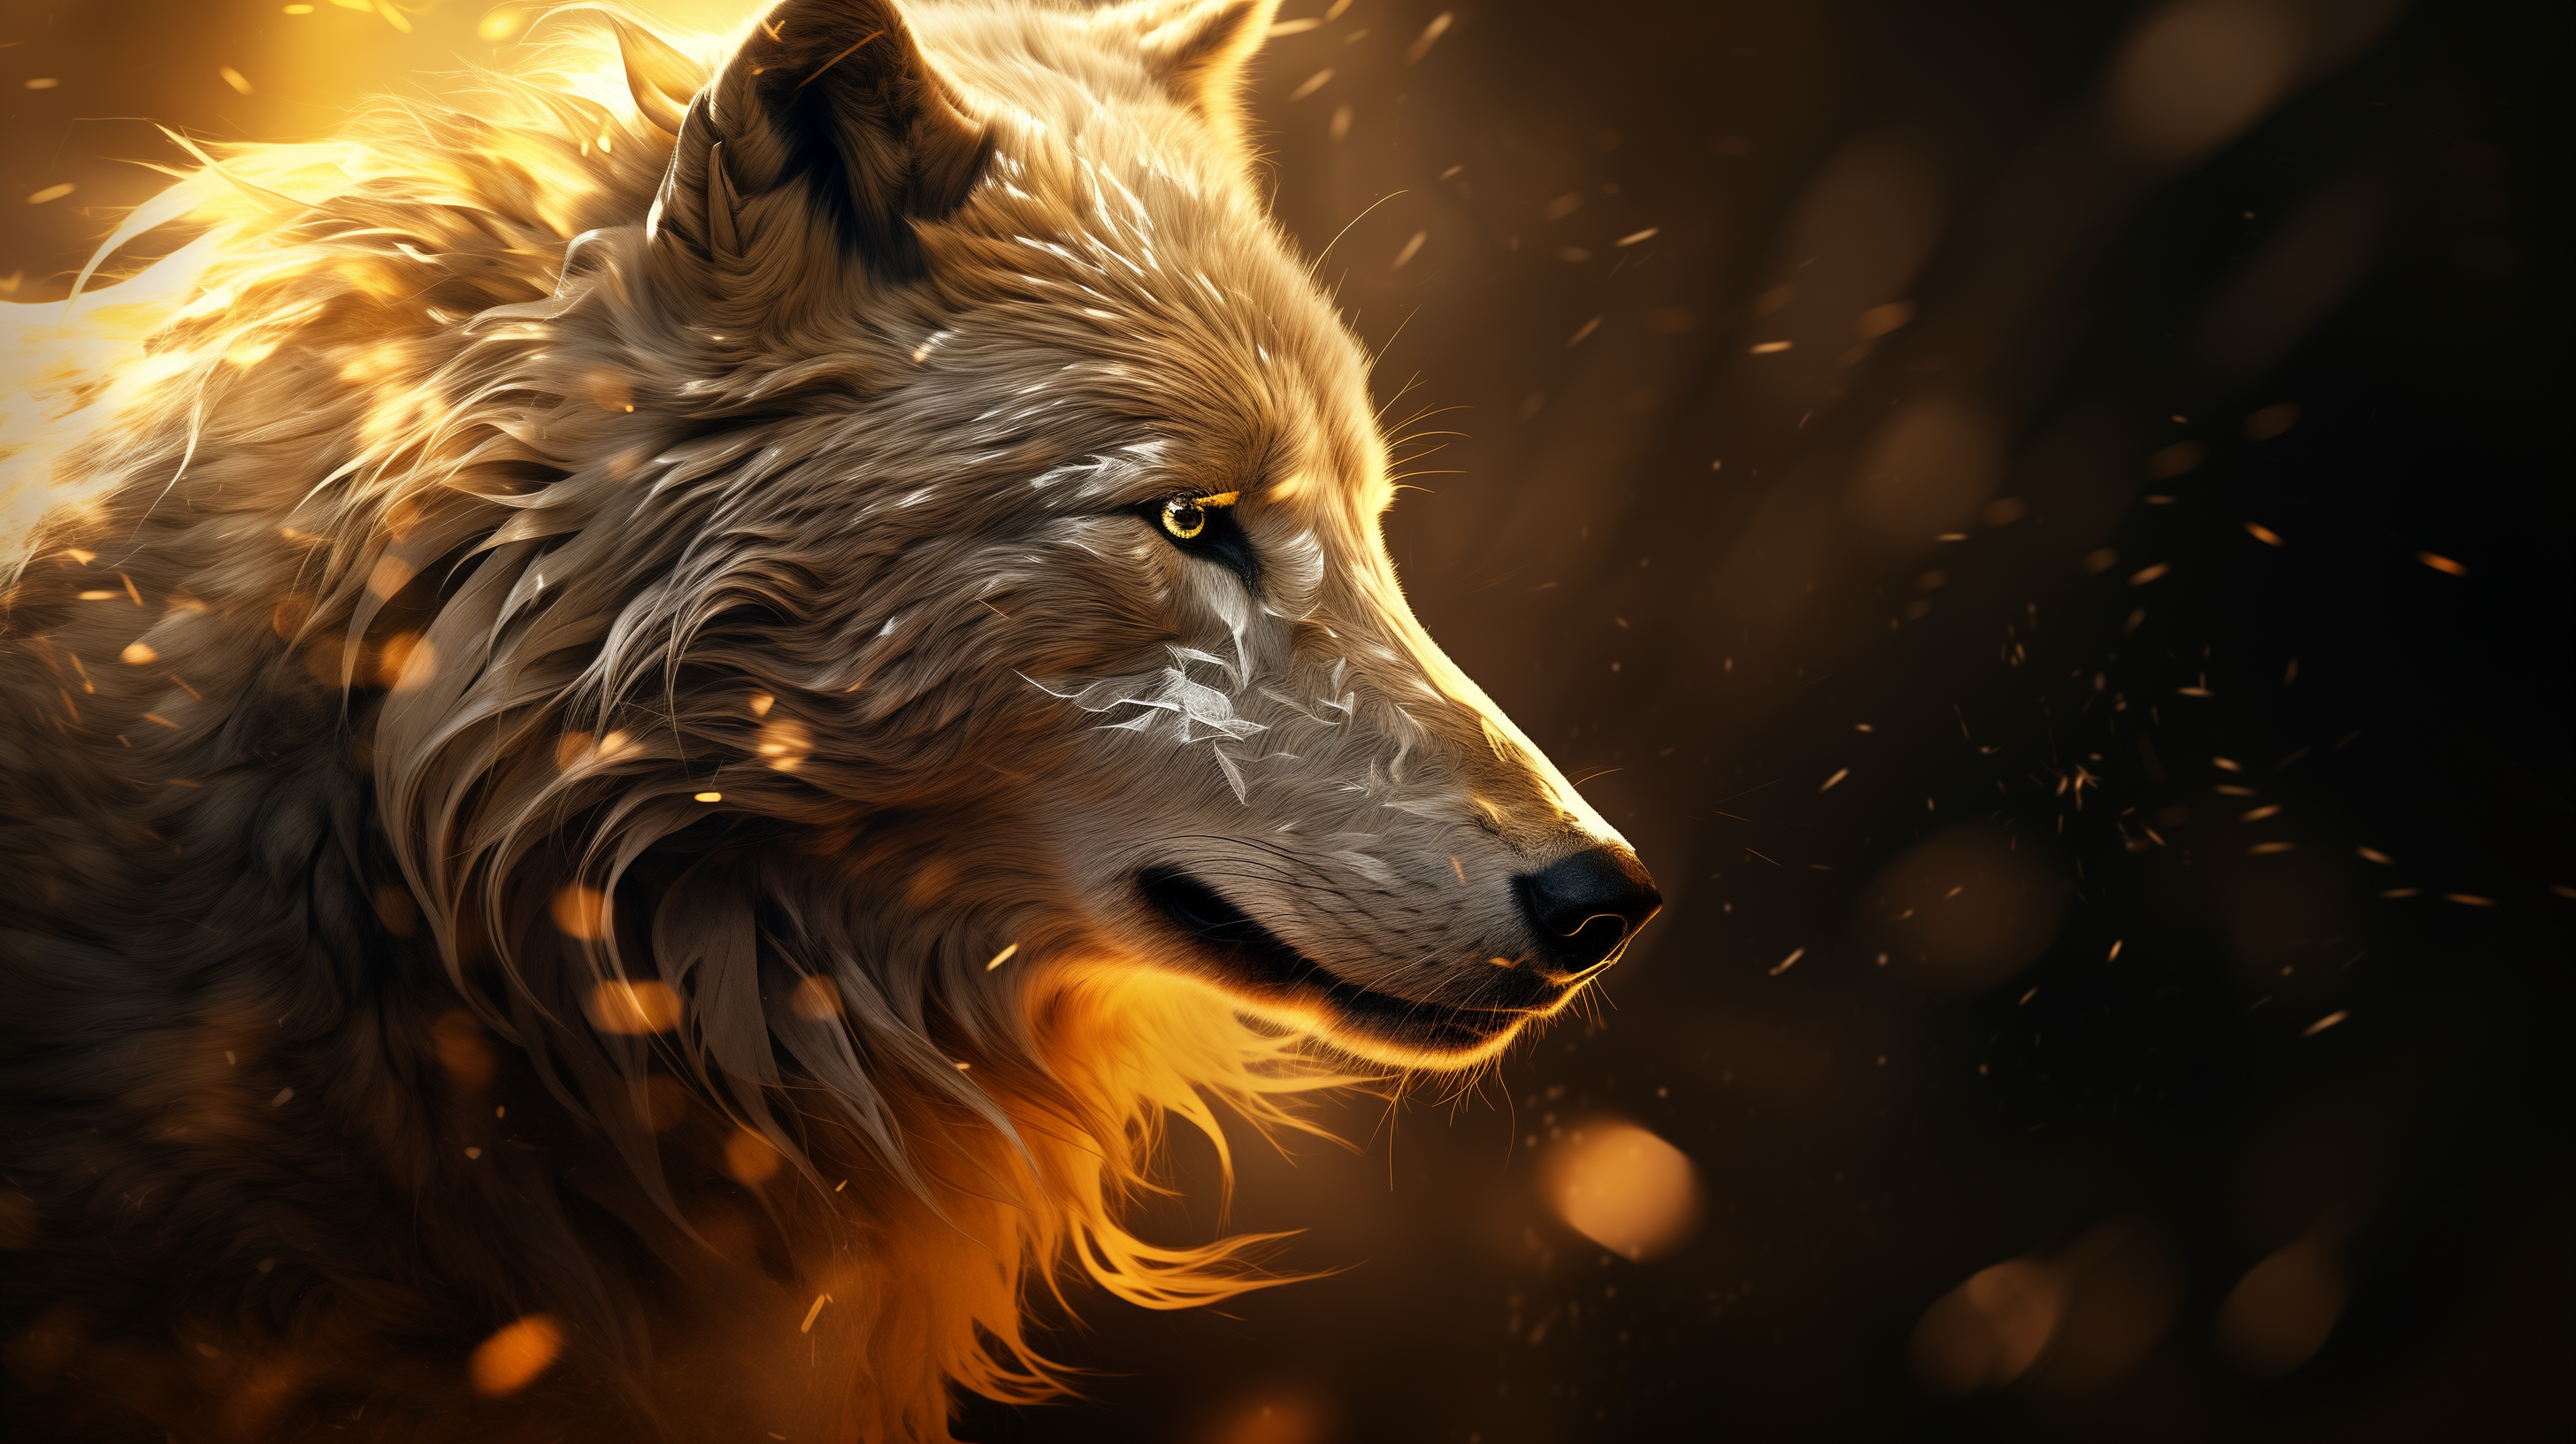 Fire Wolf Live Wallpaper - free download-cheohanoi.vn